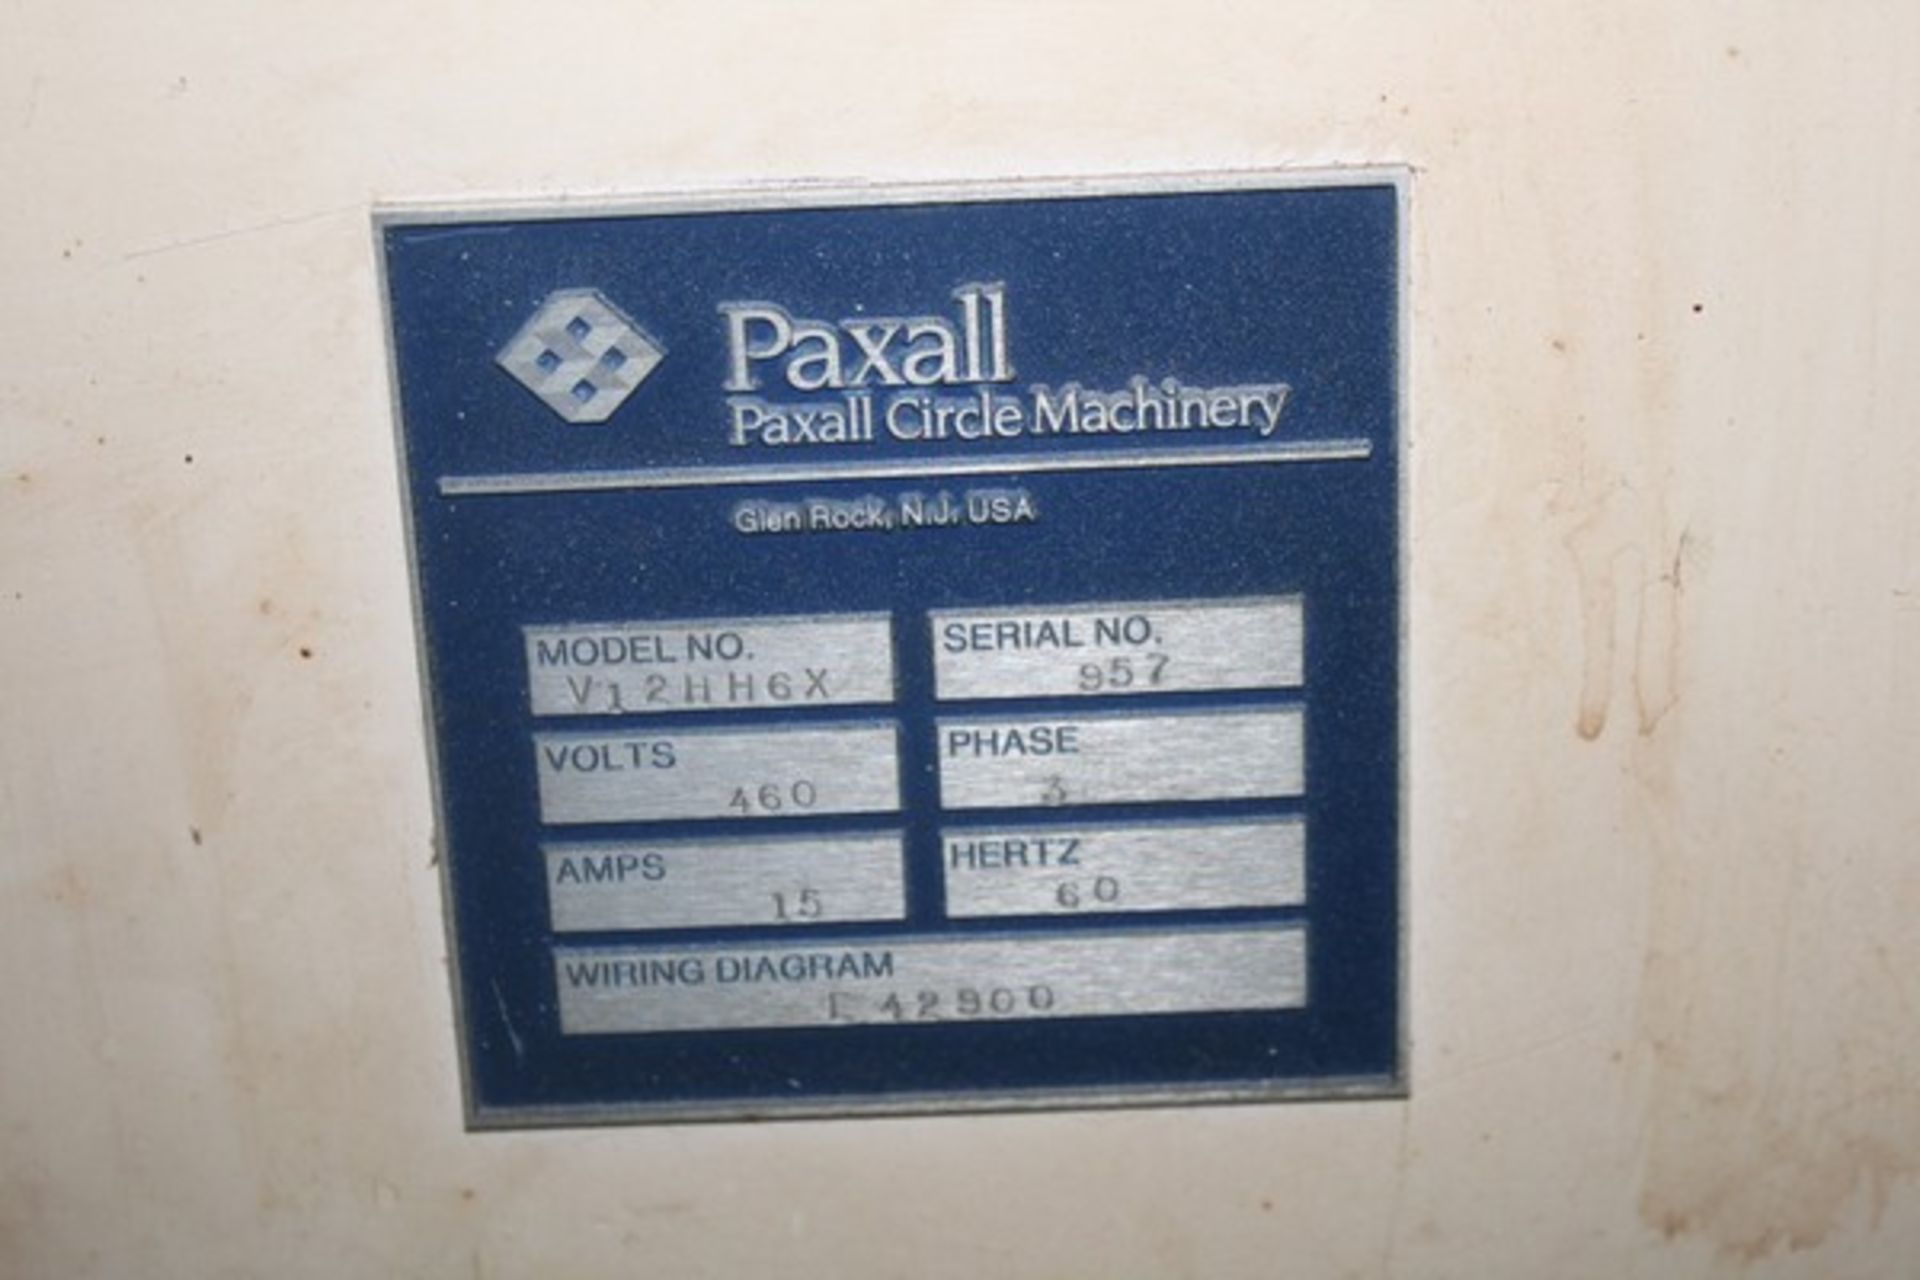 PAXALL CIRCLE, 6 UP, MODEL V12HH6X, S/N 957, WITH PLUS 500 ELECTROCAM PROGRAMMABLE SWITCH - Image 7 of 8